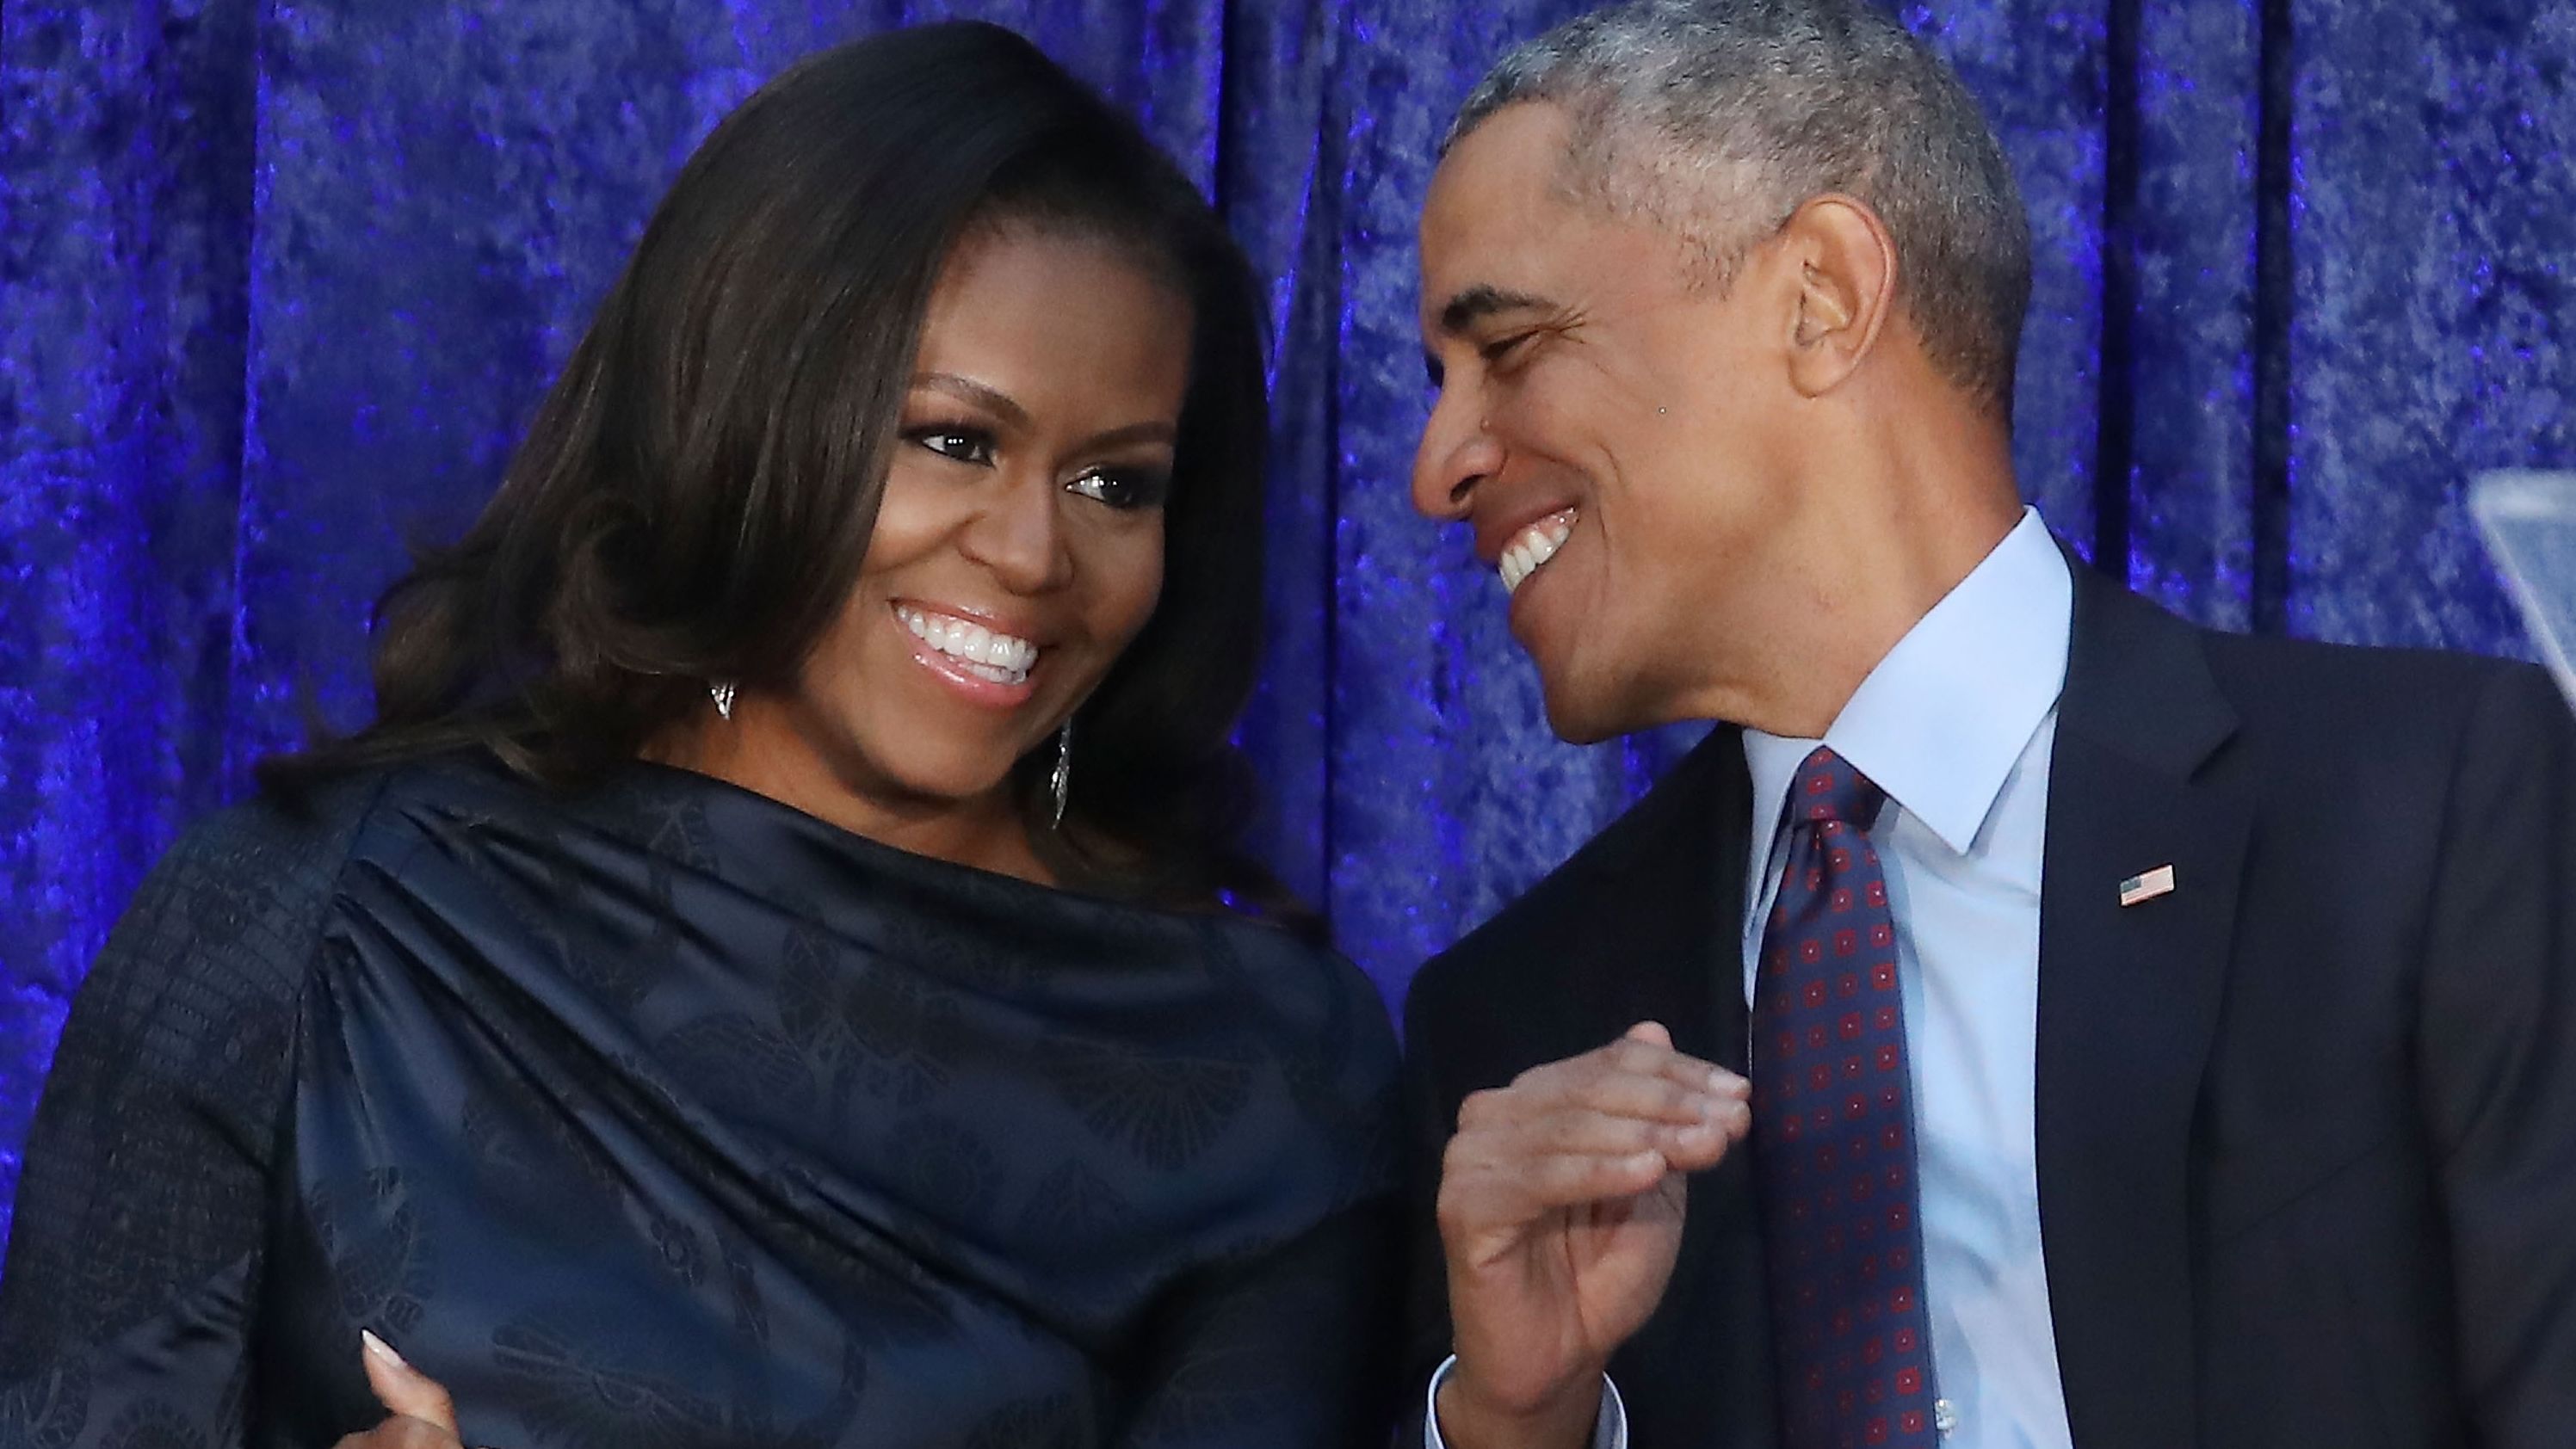 Former U.S. President Barack Obama and first lady Michelle Obama participate in the unveiling of their official portraits during a ceremony at the Smithsonian's National Portrait Gallery, on February 12, 2018 in Washington, DC. The portraits were commissioned by the Gallery, for Kehinde Wiley to create President Obama's portrait, and Amy Sherald that of Michelle Obama. 